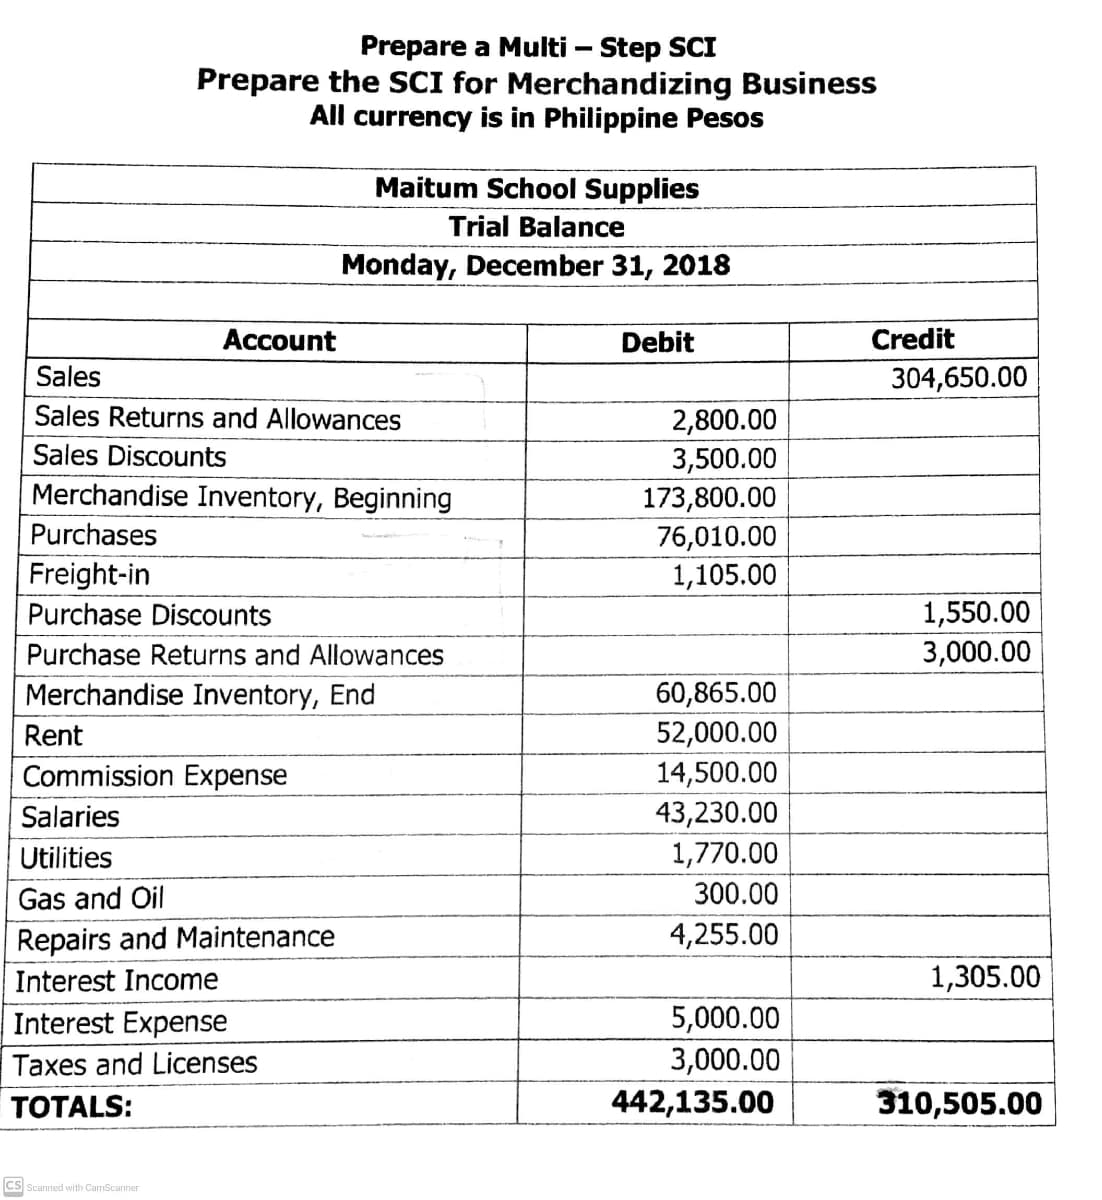 Prepare a Multi – Step SCI
Prepare the SCI for Merchandizing Business
All currency is in Philippine Pesos
Maitum School Supplies
Trial Balance
Monday, December 31, 2018
Account
Debit
Credit
Sales
304,650.00
Sales Returns and Allowances
2,800.00
Sales Discounts
3,500.00
173,800.00
76,010.00
Merchandise Inventory, Beginning
Purchases
Freight-in
1,105.00
1,550.00
3,000.00
Purchase Discounts
Purchase Returns and Allowances
60,865.00
52,000.00
Merchandise Inventory, End
Rent
Commission Expense
14,500.00
Salaries
43,230.00
1,770.00
300.00
Utilities
Gas and Oil
Repairs and Maintenance
4,255.00
Interest Income
1,305.00
Interest Expense
5,000.00
Taxes and Licenses
3,000.00
TOTALS:
442,135.00
310,505.00
CS Scanned with CamScanner
